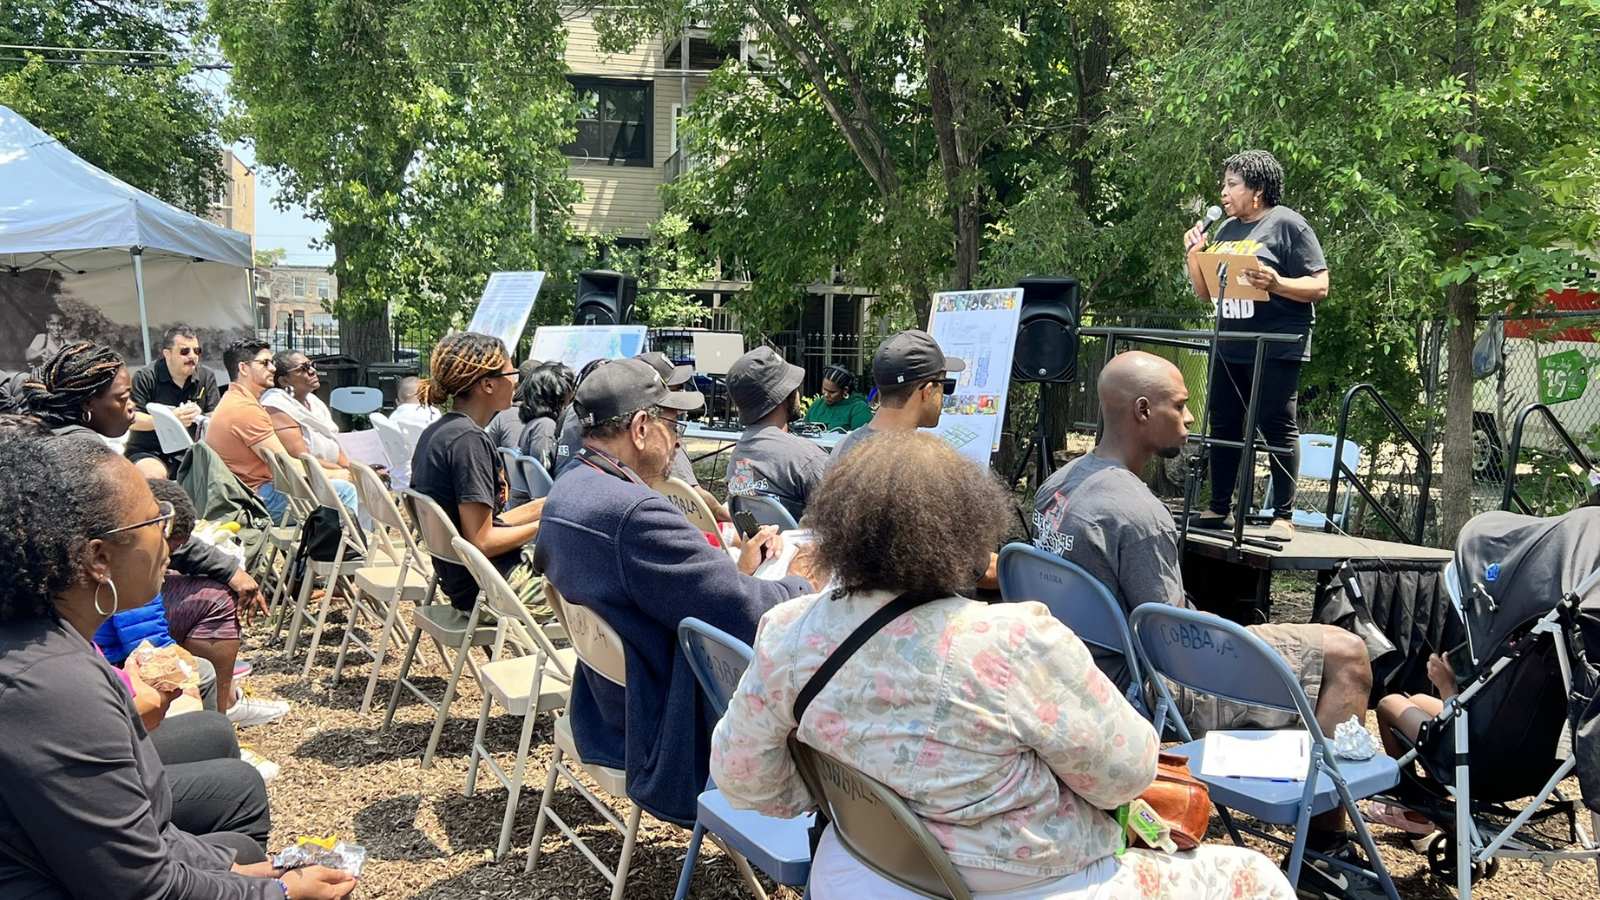 "Blacks in Green Founder/CEO Naomi Davis welcomes the crowd at Juneteenth Celebration" / Photo courtesy of Blacks in Green